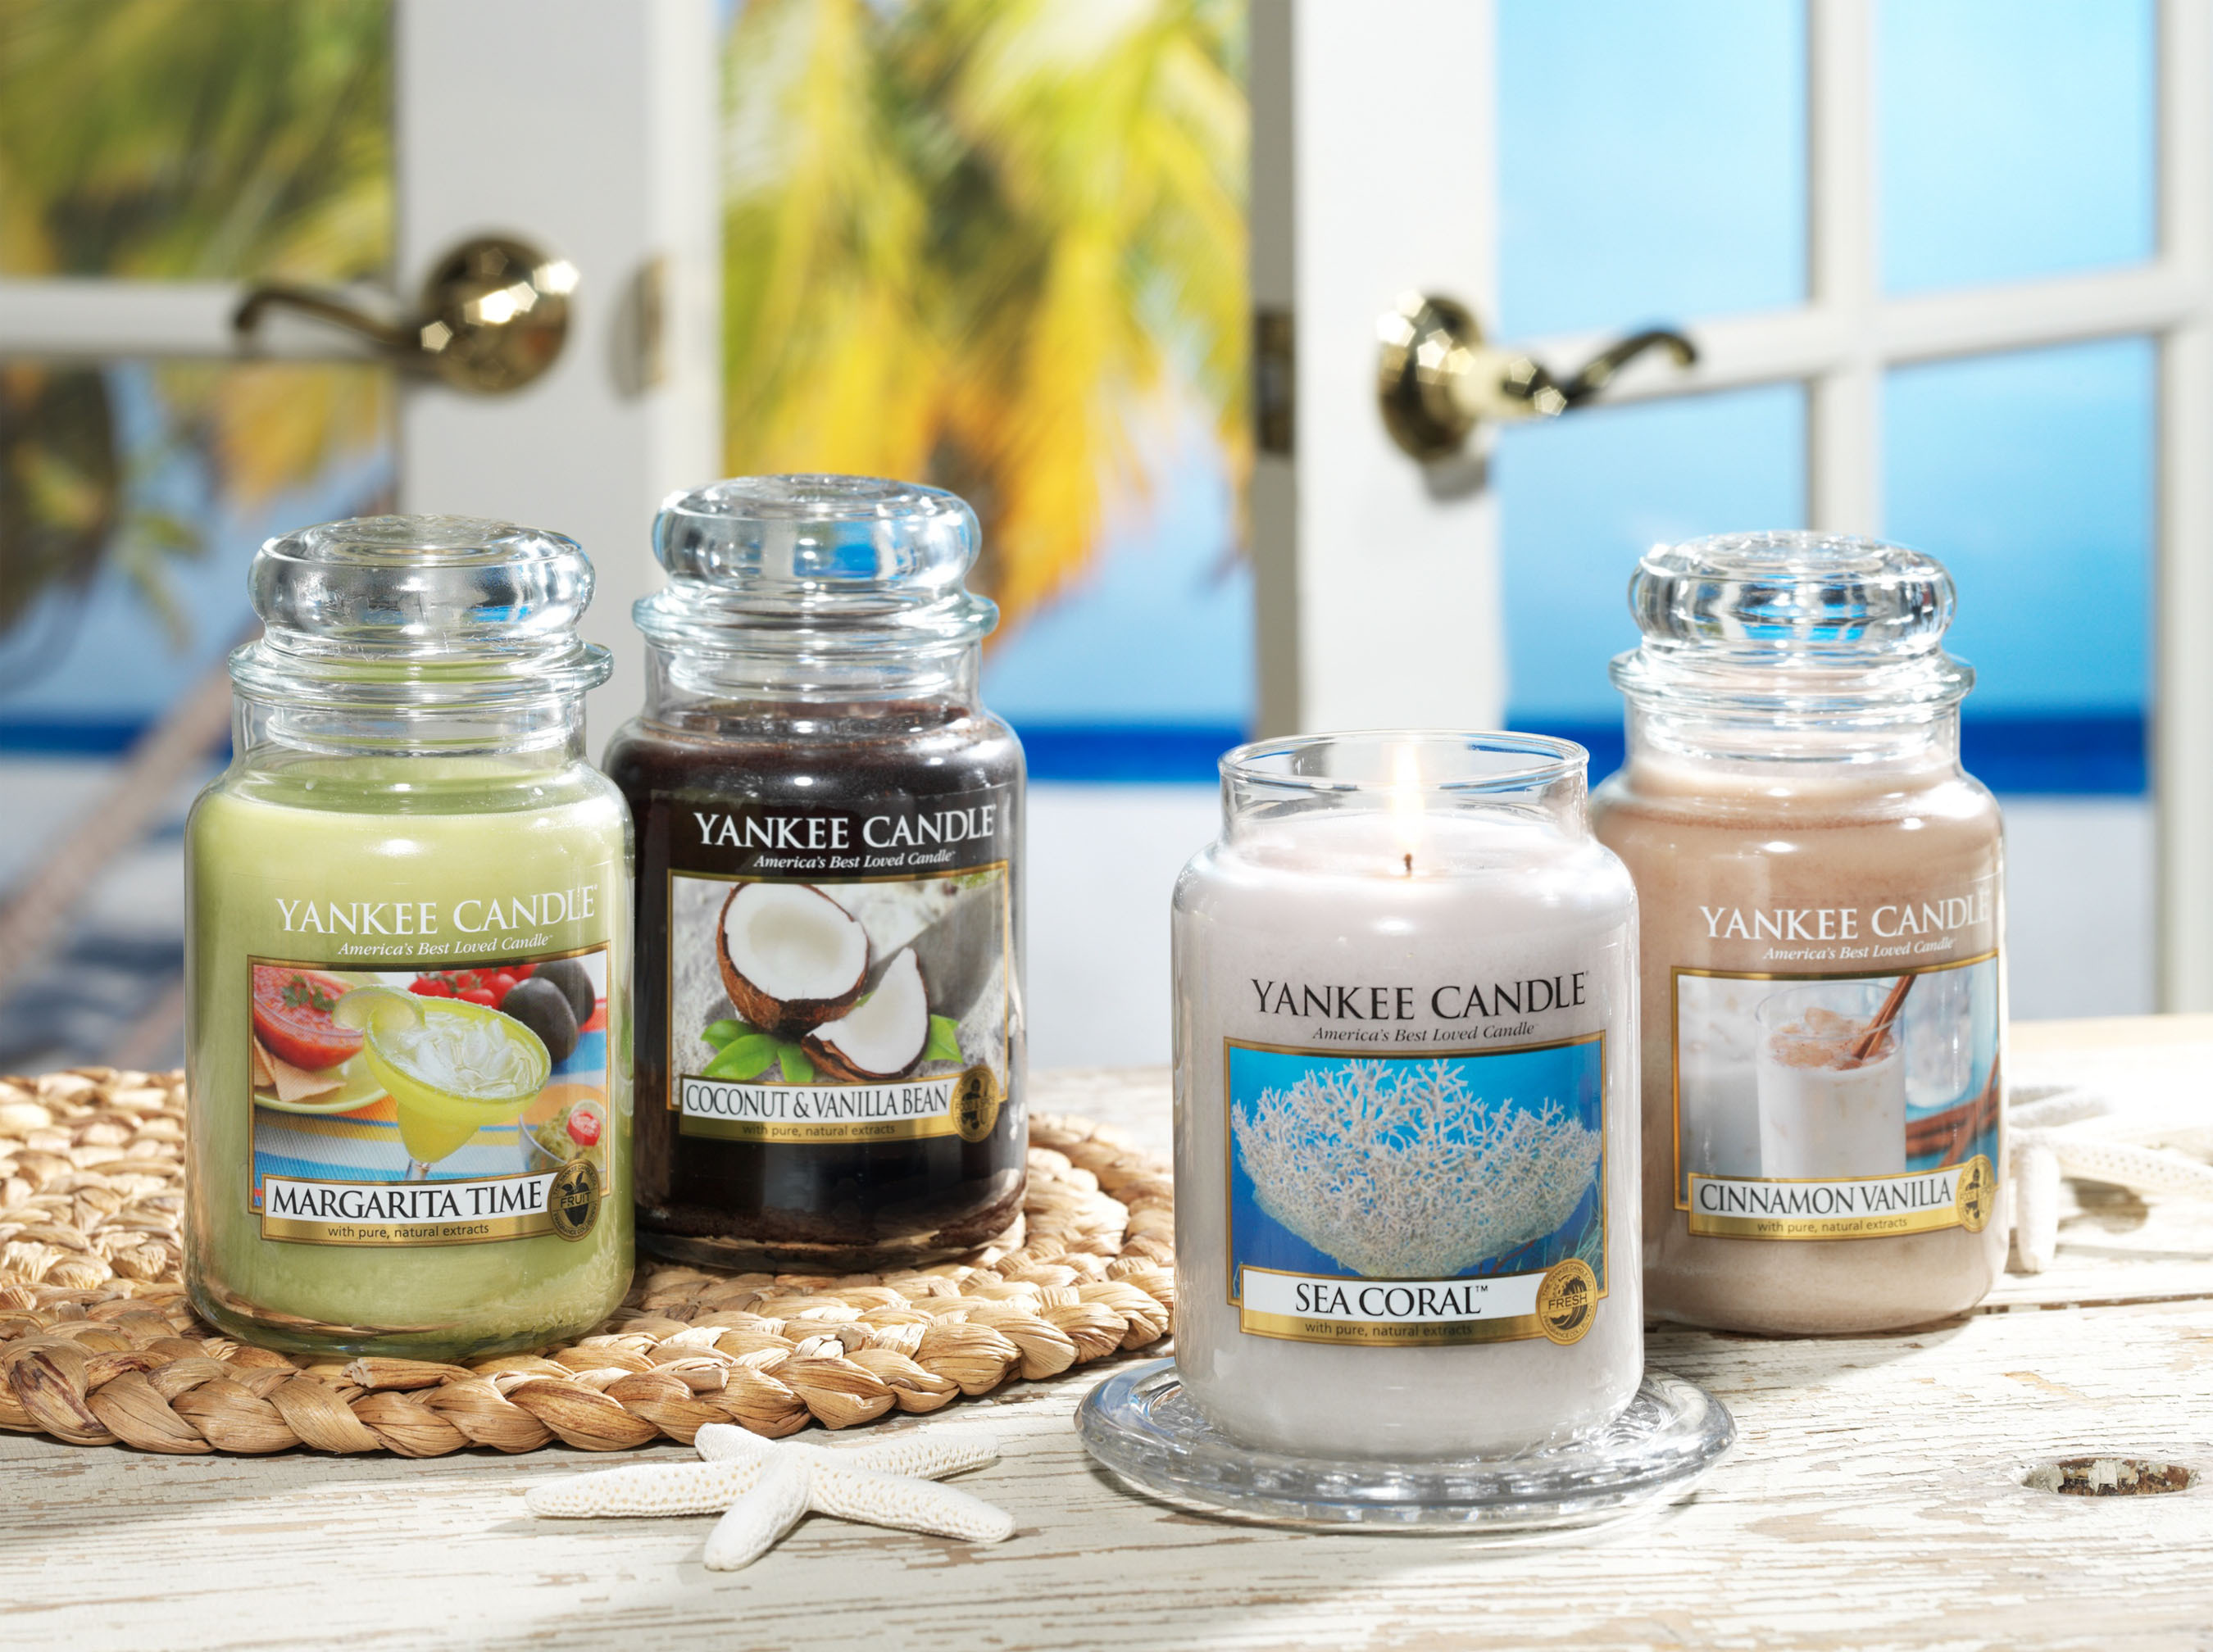 Yankee Candle Celebrates Summer with New Fragrances and Limited Edition